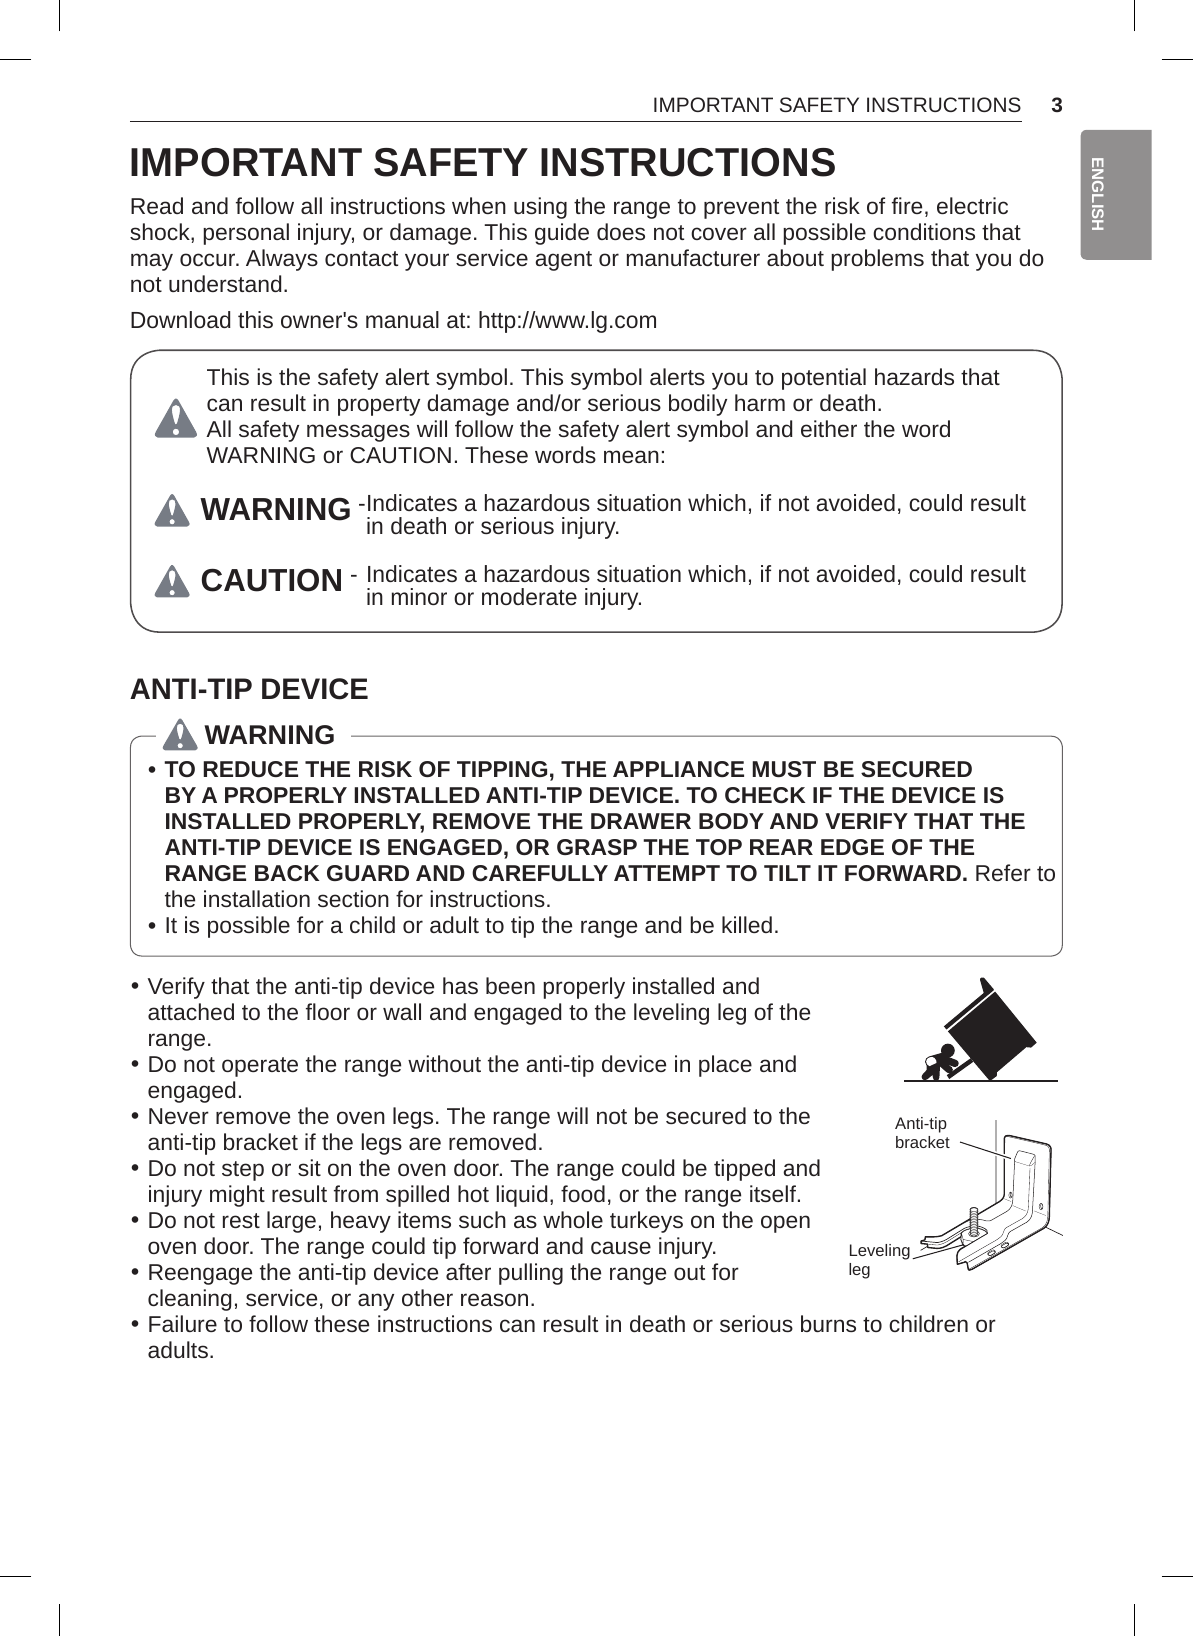 3IMPORTANT SAFETY INSTRUCTIONSENGLISHIMPORTANT SAFETY INSTRUCTIONSRead and follow all instructions when using the range to prevent the risk of fire, electric shock, personal injury, or damage. This guide does not cover all possible conditions that may occur. Always contact your service agent or manufacturer about problems that you do not understand.Download this owner&apos;s manual at: http://www.lg.comThis is the safety alert symbol. This symbol alerts you to potential hazards that can result in property damage and/or serious bodily harm or death. All safety messages will follow the safety alert symbol and either the word WARNING or CAUTION. These words mean:WARNING -  Indicates a hazardous situation which, if not avoided, could result in death or serious injury.CAUTION -  Indicates a hazardous situation which, if not avoided, could result in minor or moderate injury.ANTI-TIP DEVICEWARNING •TO REDUCE THE RISK OF TIPPING, THE APPLIANCE MUST BE SECURED BY A PROPERLY INSTALLED ANTI-TIP DEVICE. TO CHECK IF THE DEVICE IS INSTALLED PROPERLY, REMOVE THE DRAWER BODY AND VERIFY THAT THE ANTI-TIP DEVICE IS ENGAGED, OR GRASP THE TOP REAR EDGE OF THE RANGE BACK GUARD AND CAREFULLY ATTEMPT TO TILT IT FORWARD. Refer to the installation section for instructions. •It is possible for a child or adult to tip the range and be killed. •Verify that the anti-tip device has been properly installed and attached to the floor or wall and engaged to the leveling leg of the range. •Do not operate the range without the anti-tip device in place and engaged. •Never remove the oven legs. The range will not be secured to the anti-tip bracket if the legs are removed. •Do not step or sit on the oven door. The range could be tipped and injury might result from spilled hot liquid, food, or the range itself. •Do not rest large, heavy items such as whole turkeys on the open oven door. The range could tip forward and cause injury. •Reengage the anti-tip device after pulling the range out for cleaning, service, or any other reason. •Failure to follow these instructions can result in death or serious burns to children or adults.Anti-tip bracketLeveling leg